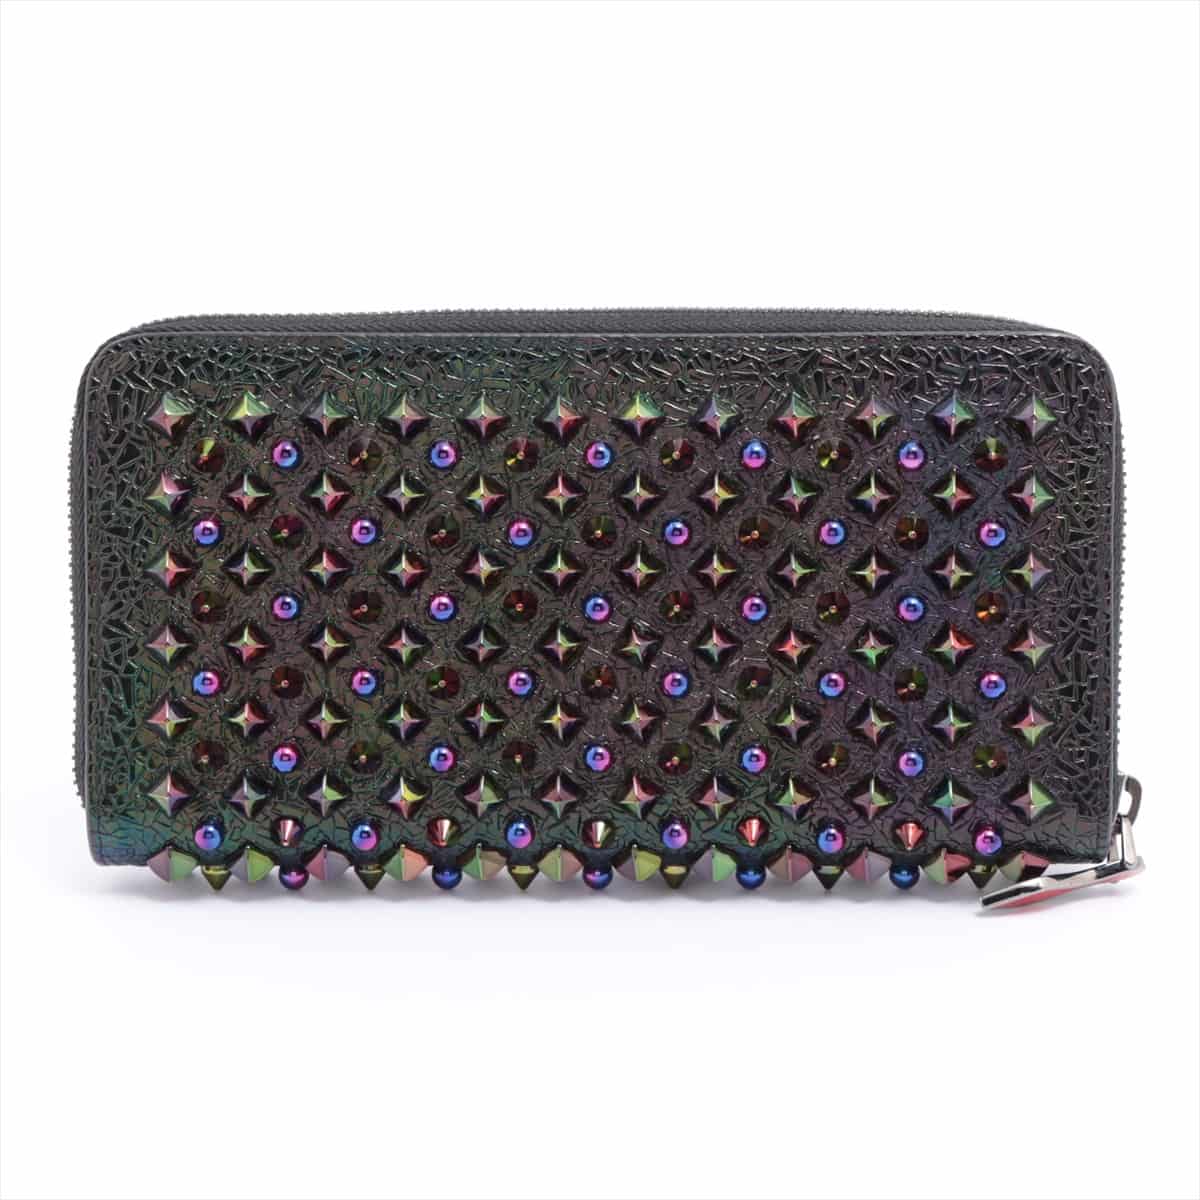 Christian Louboutin Panettone Studs Leather Round-Zip-Wallet Multicolor There is dirt adhesion between the studs